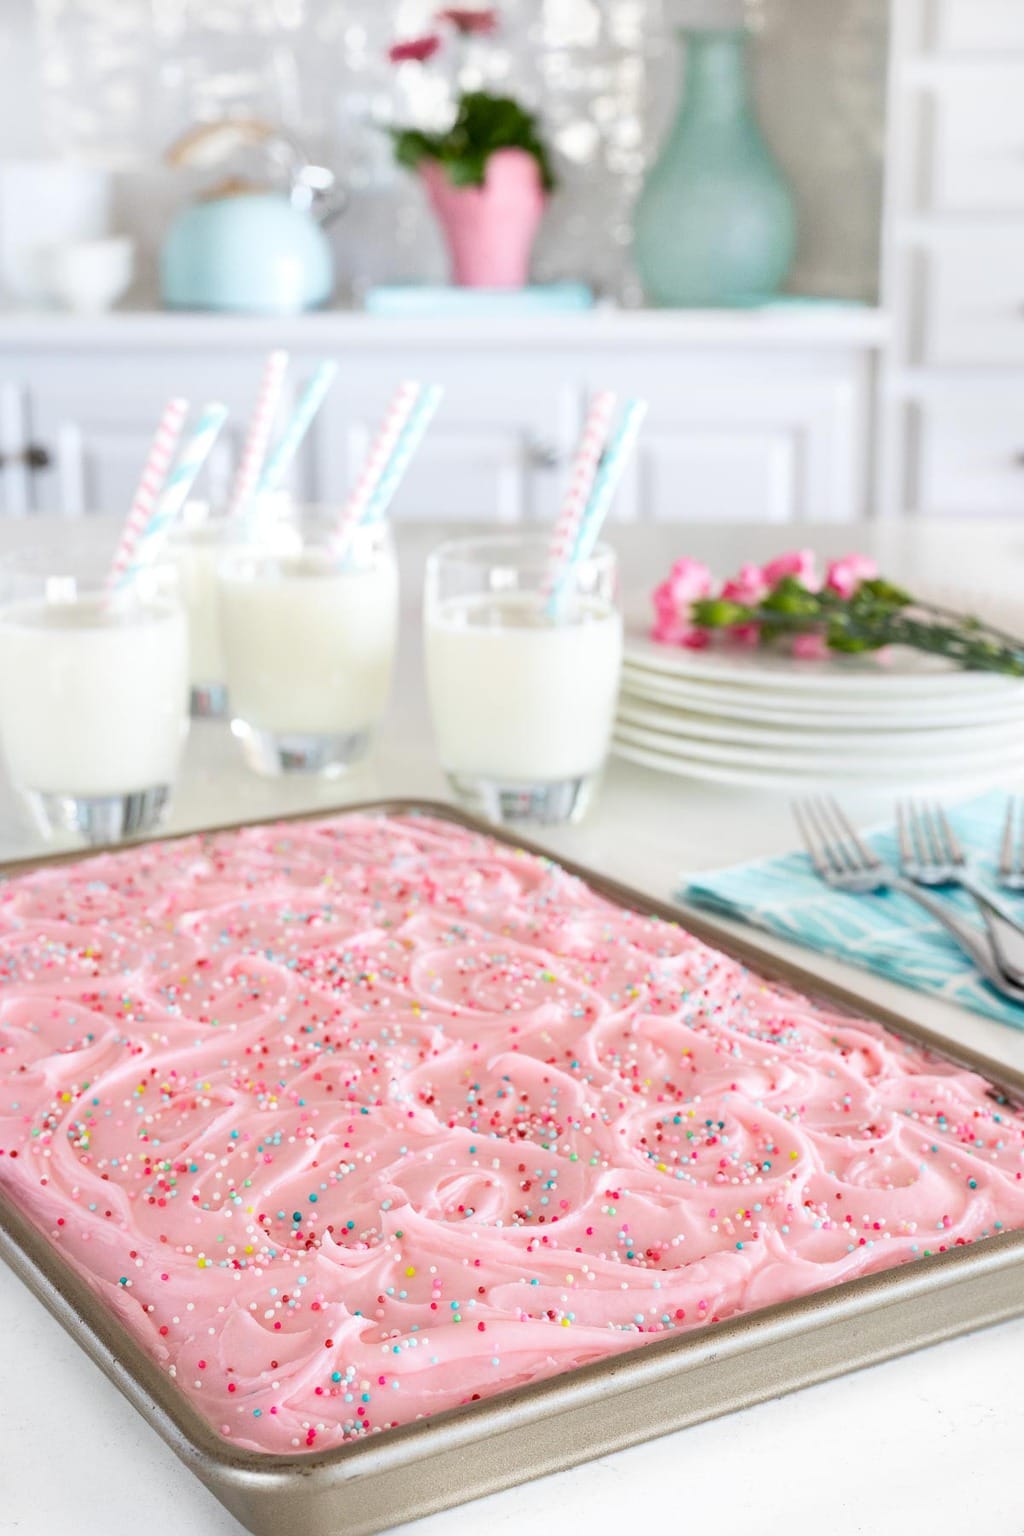 Vertical closeup photo of a Ridiculously Easy Funfetti Sheet Cake on a white kitchen island with glasses of milk in the background.